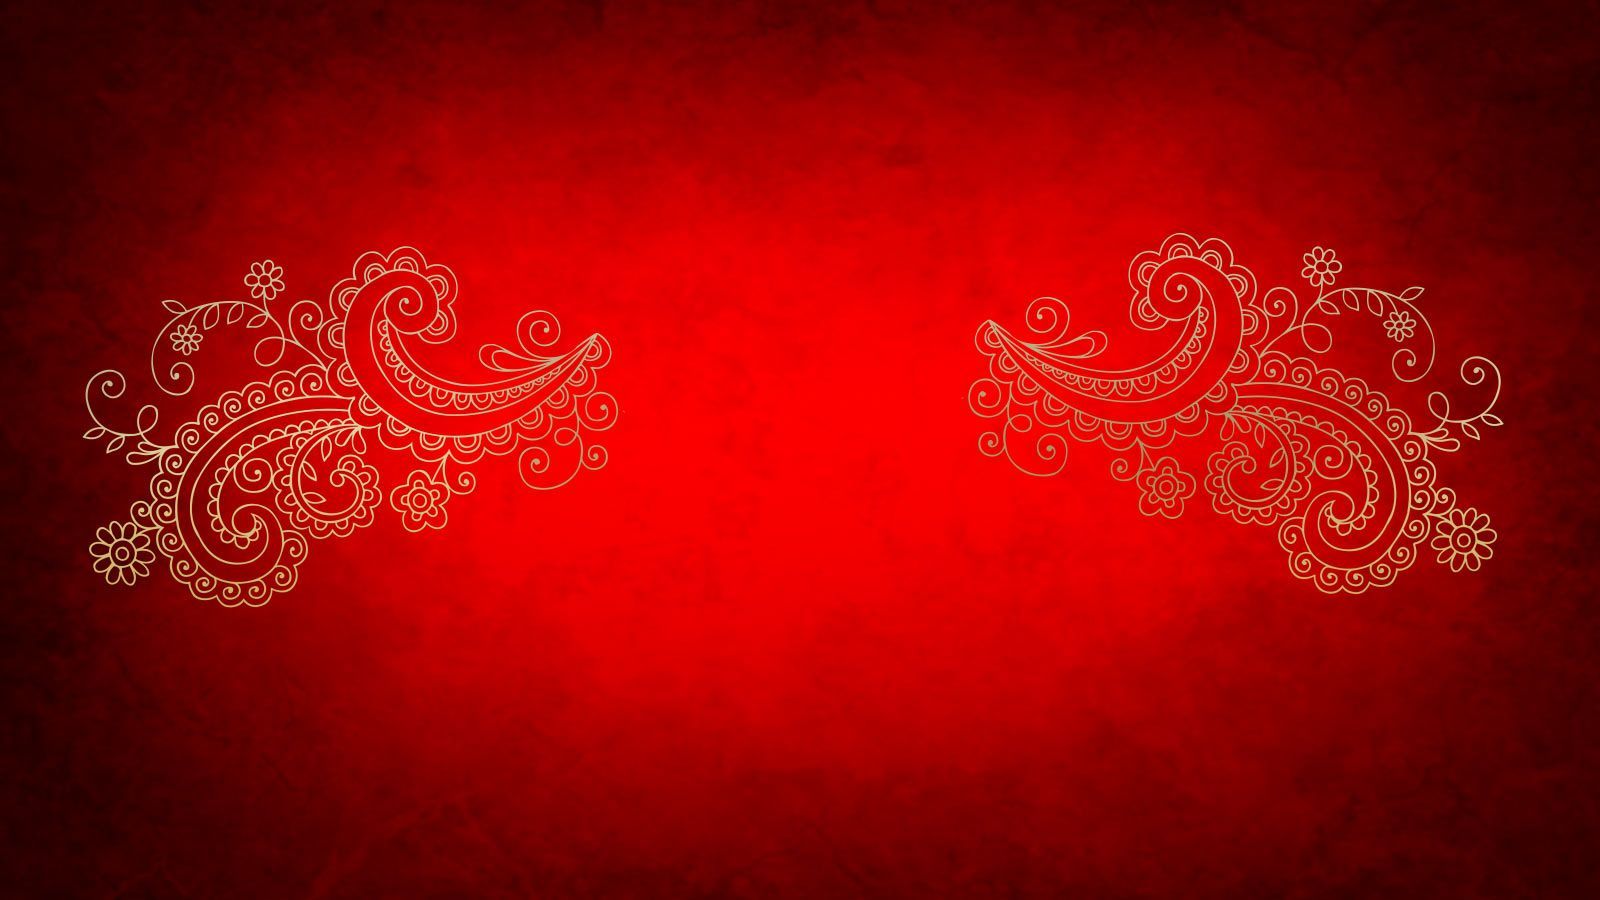 Om (Hinduism) HD Wallpapers and Backgrounds